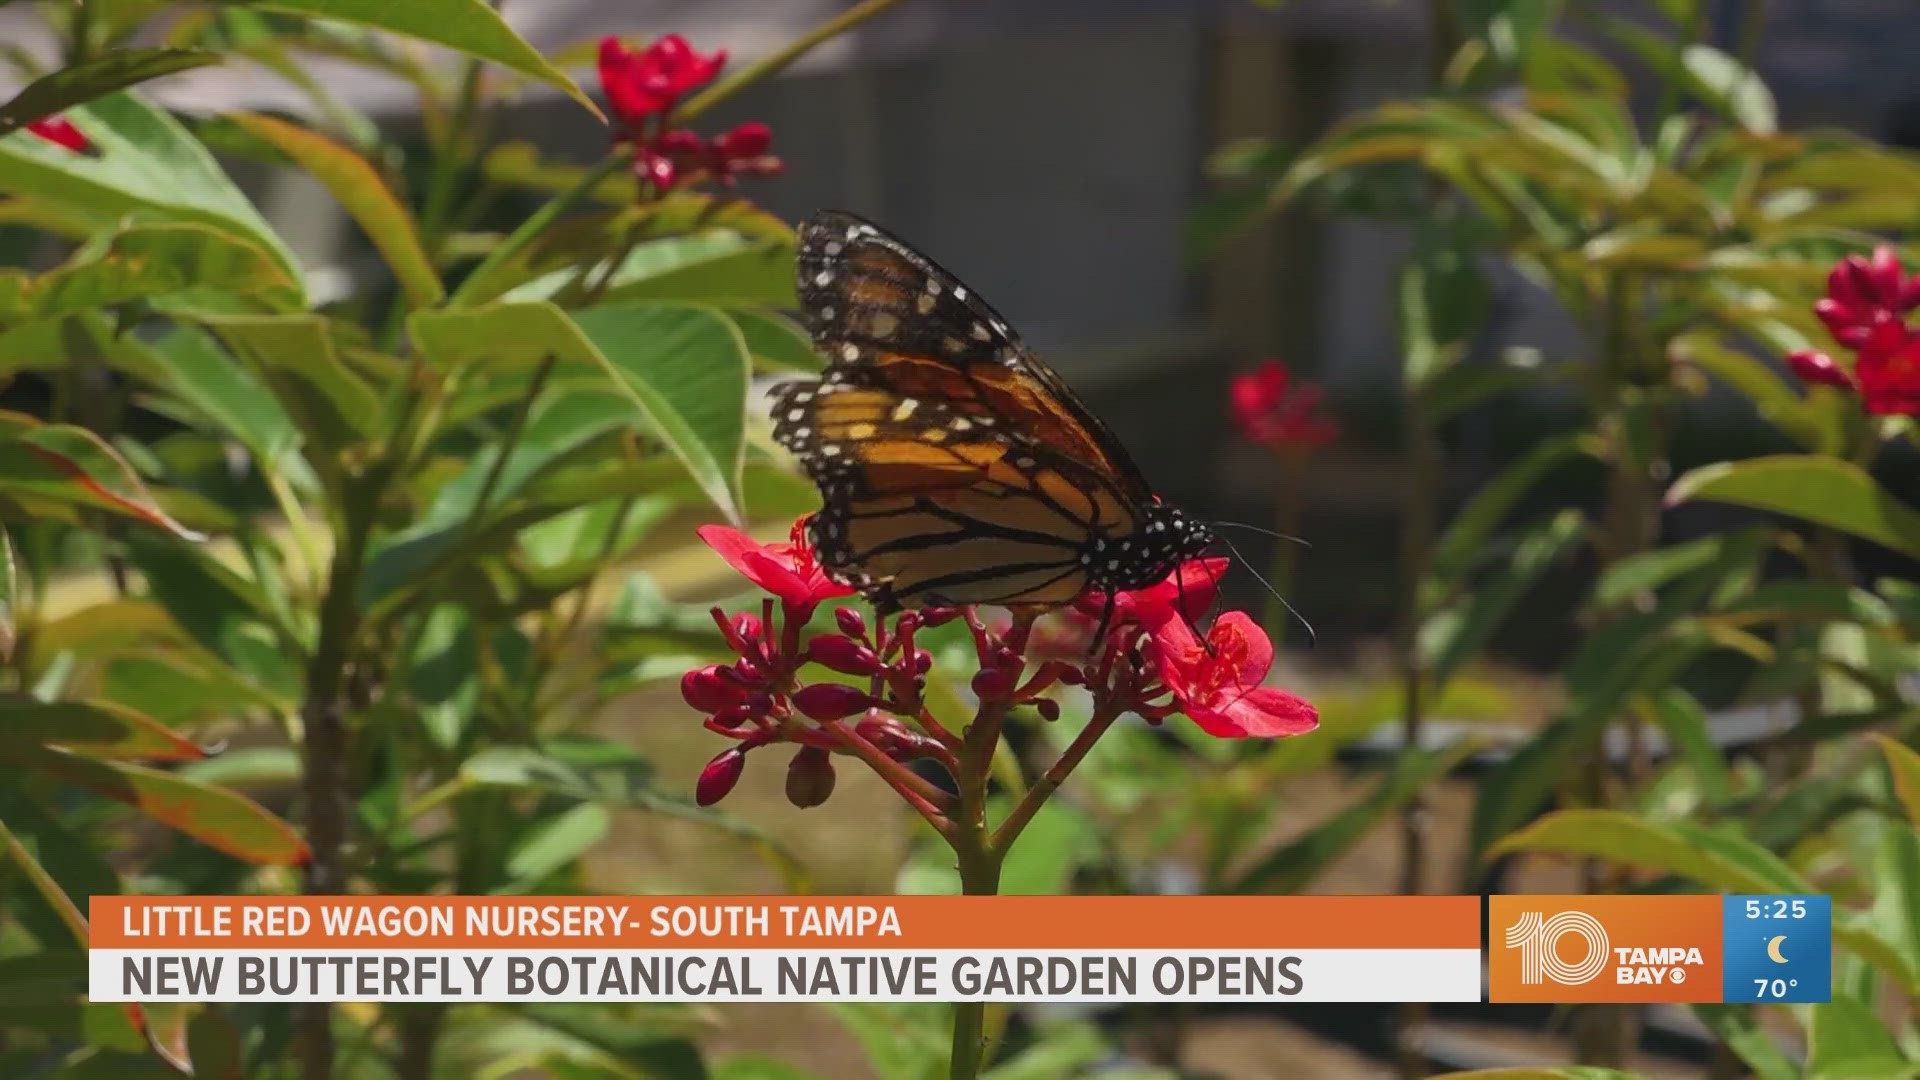 The Tampa Bay Butterfly Foundation will unveil its new native plant garden this Sunday at the Little Red Wagon Native Nursery in South Tampa.